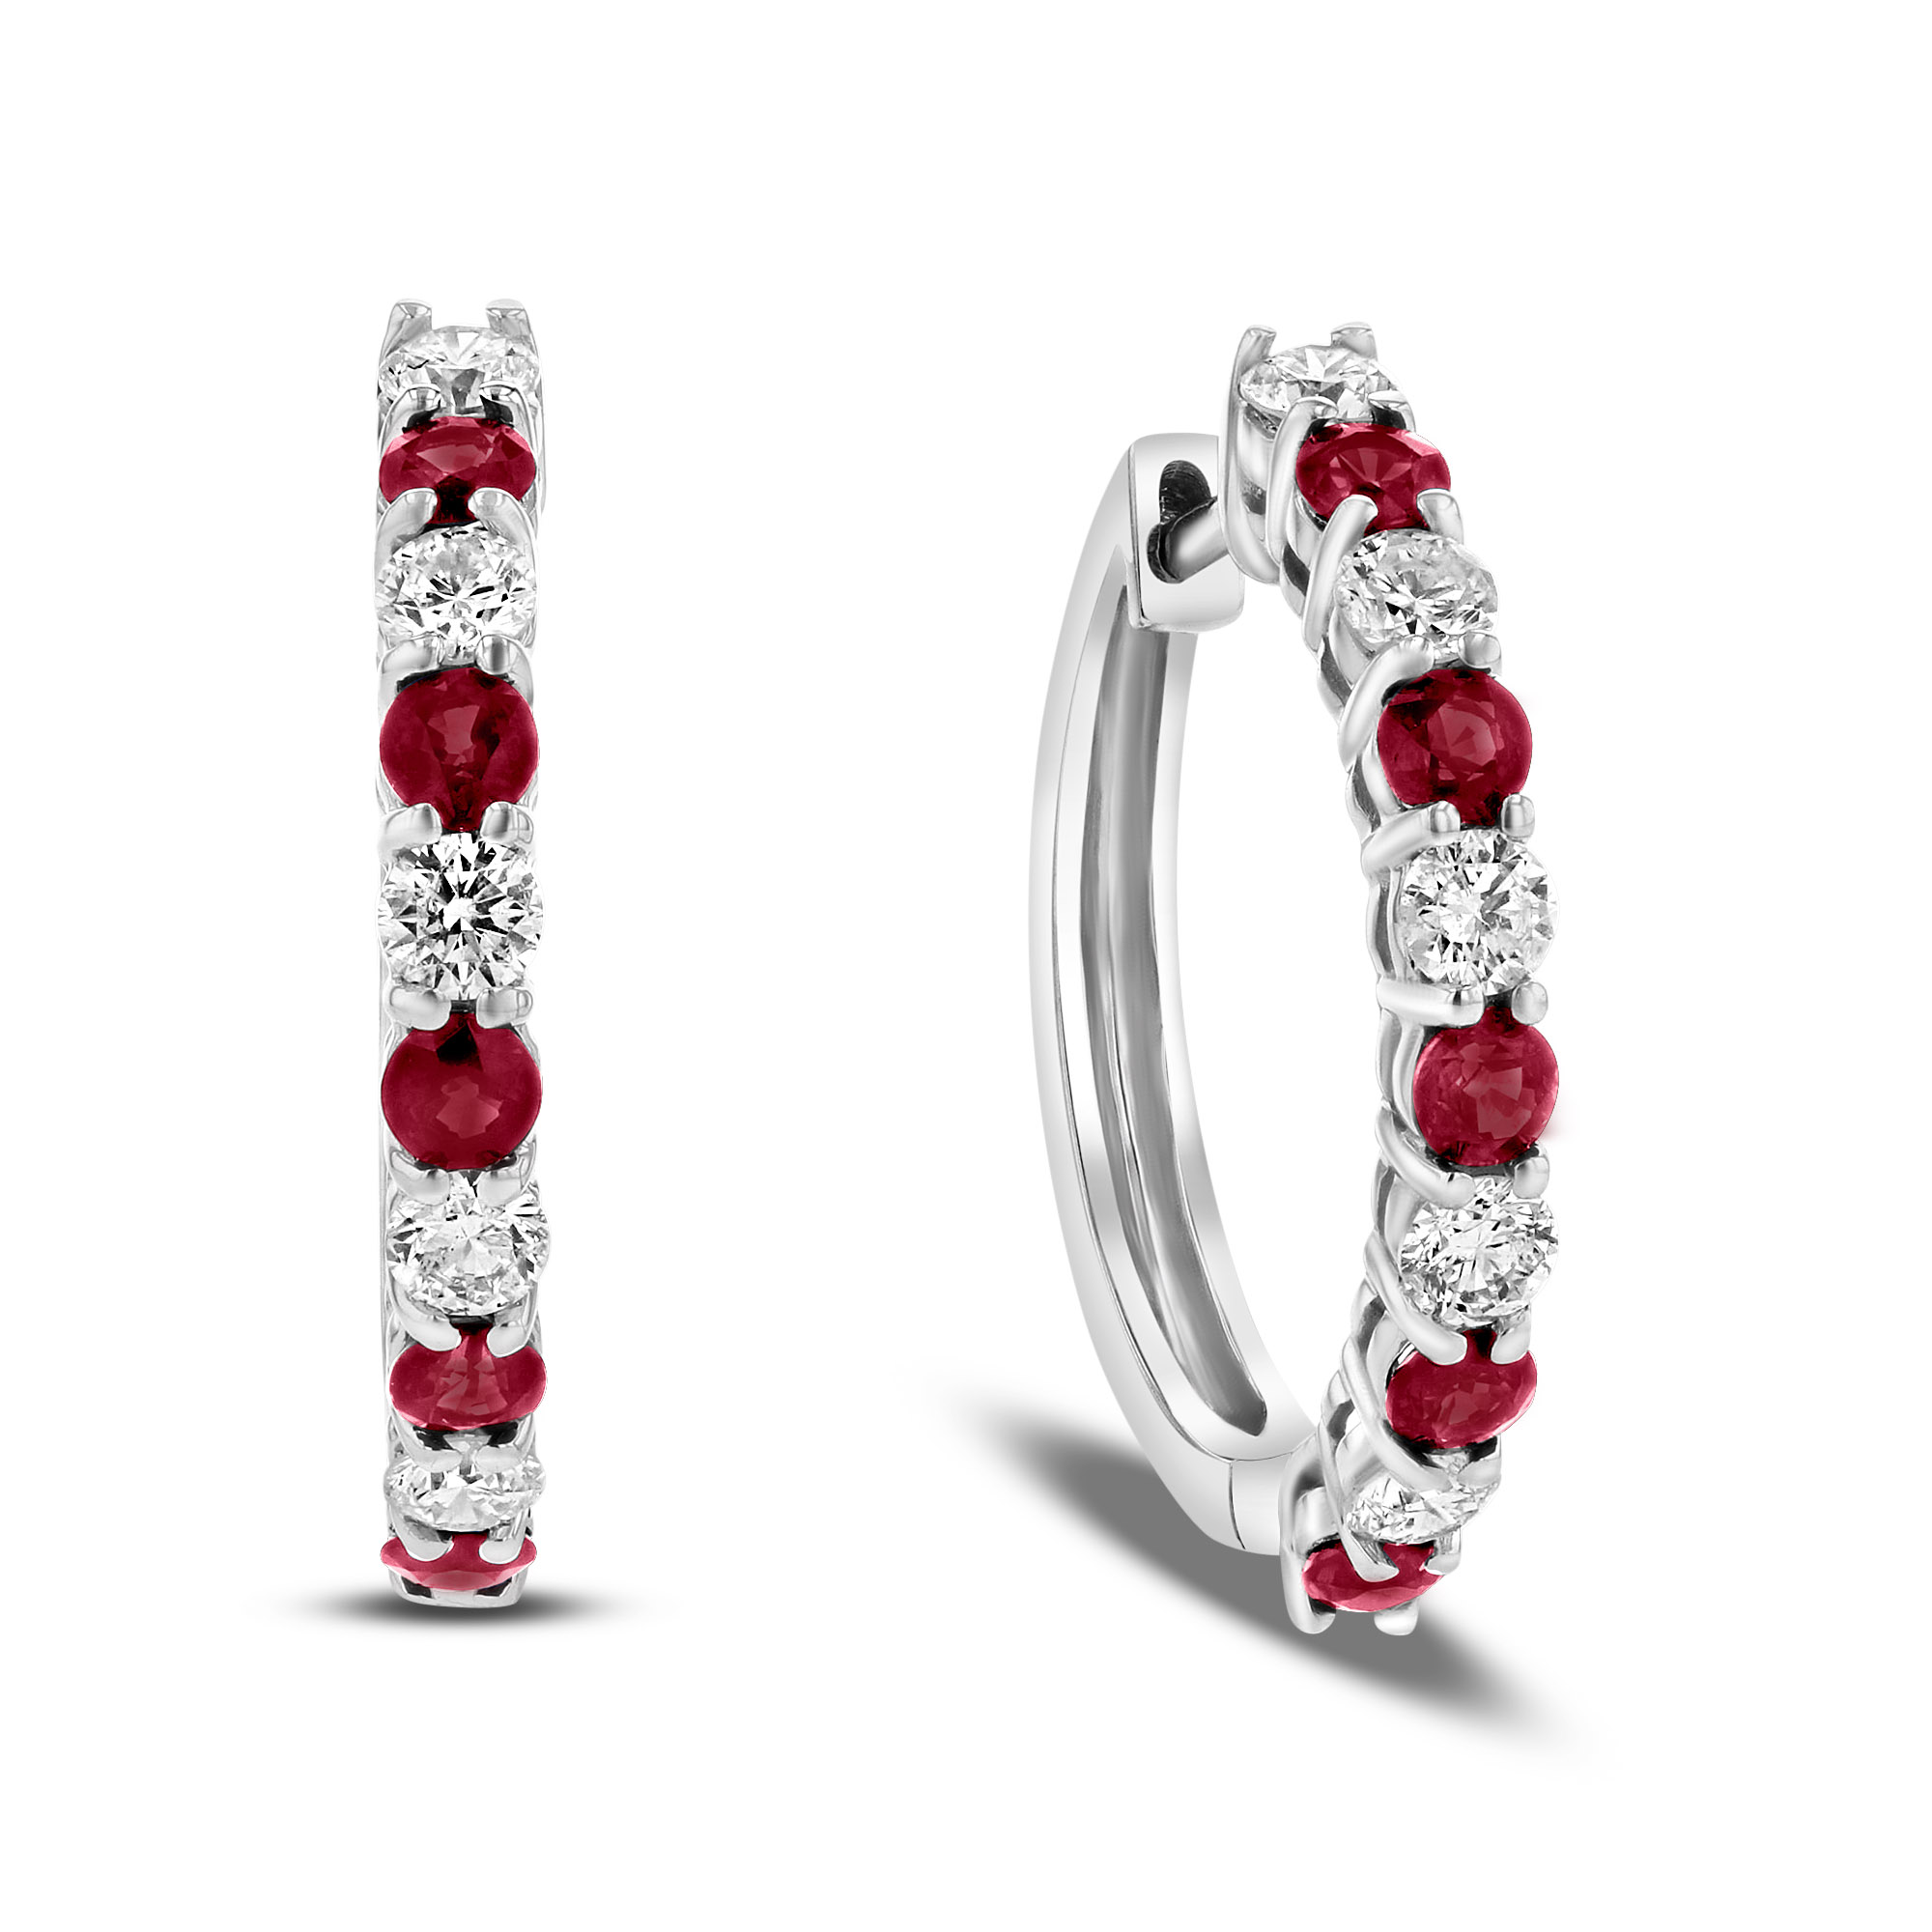 View 1.35ctw Diamond and Ruby Hoop Earrings in 14k White Gold